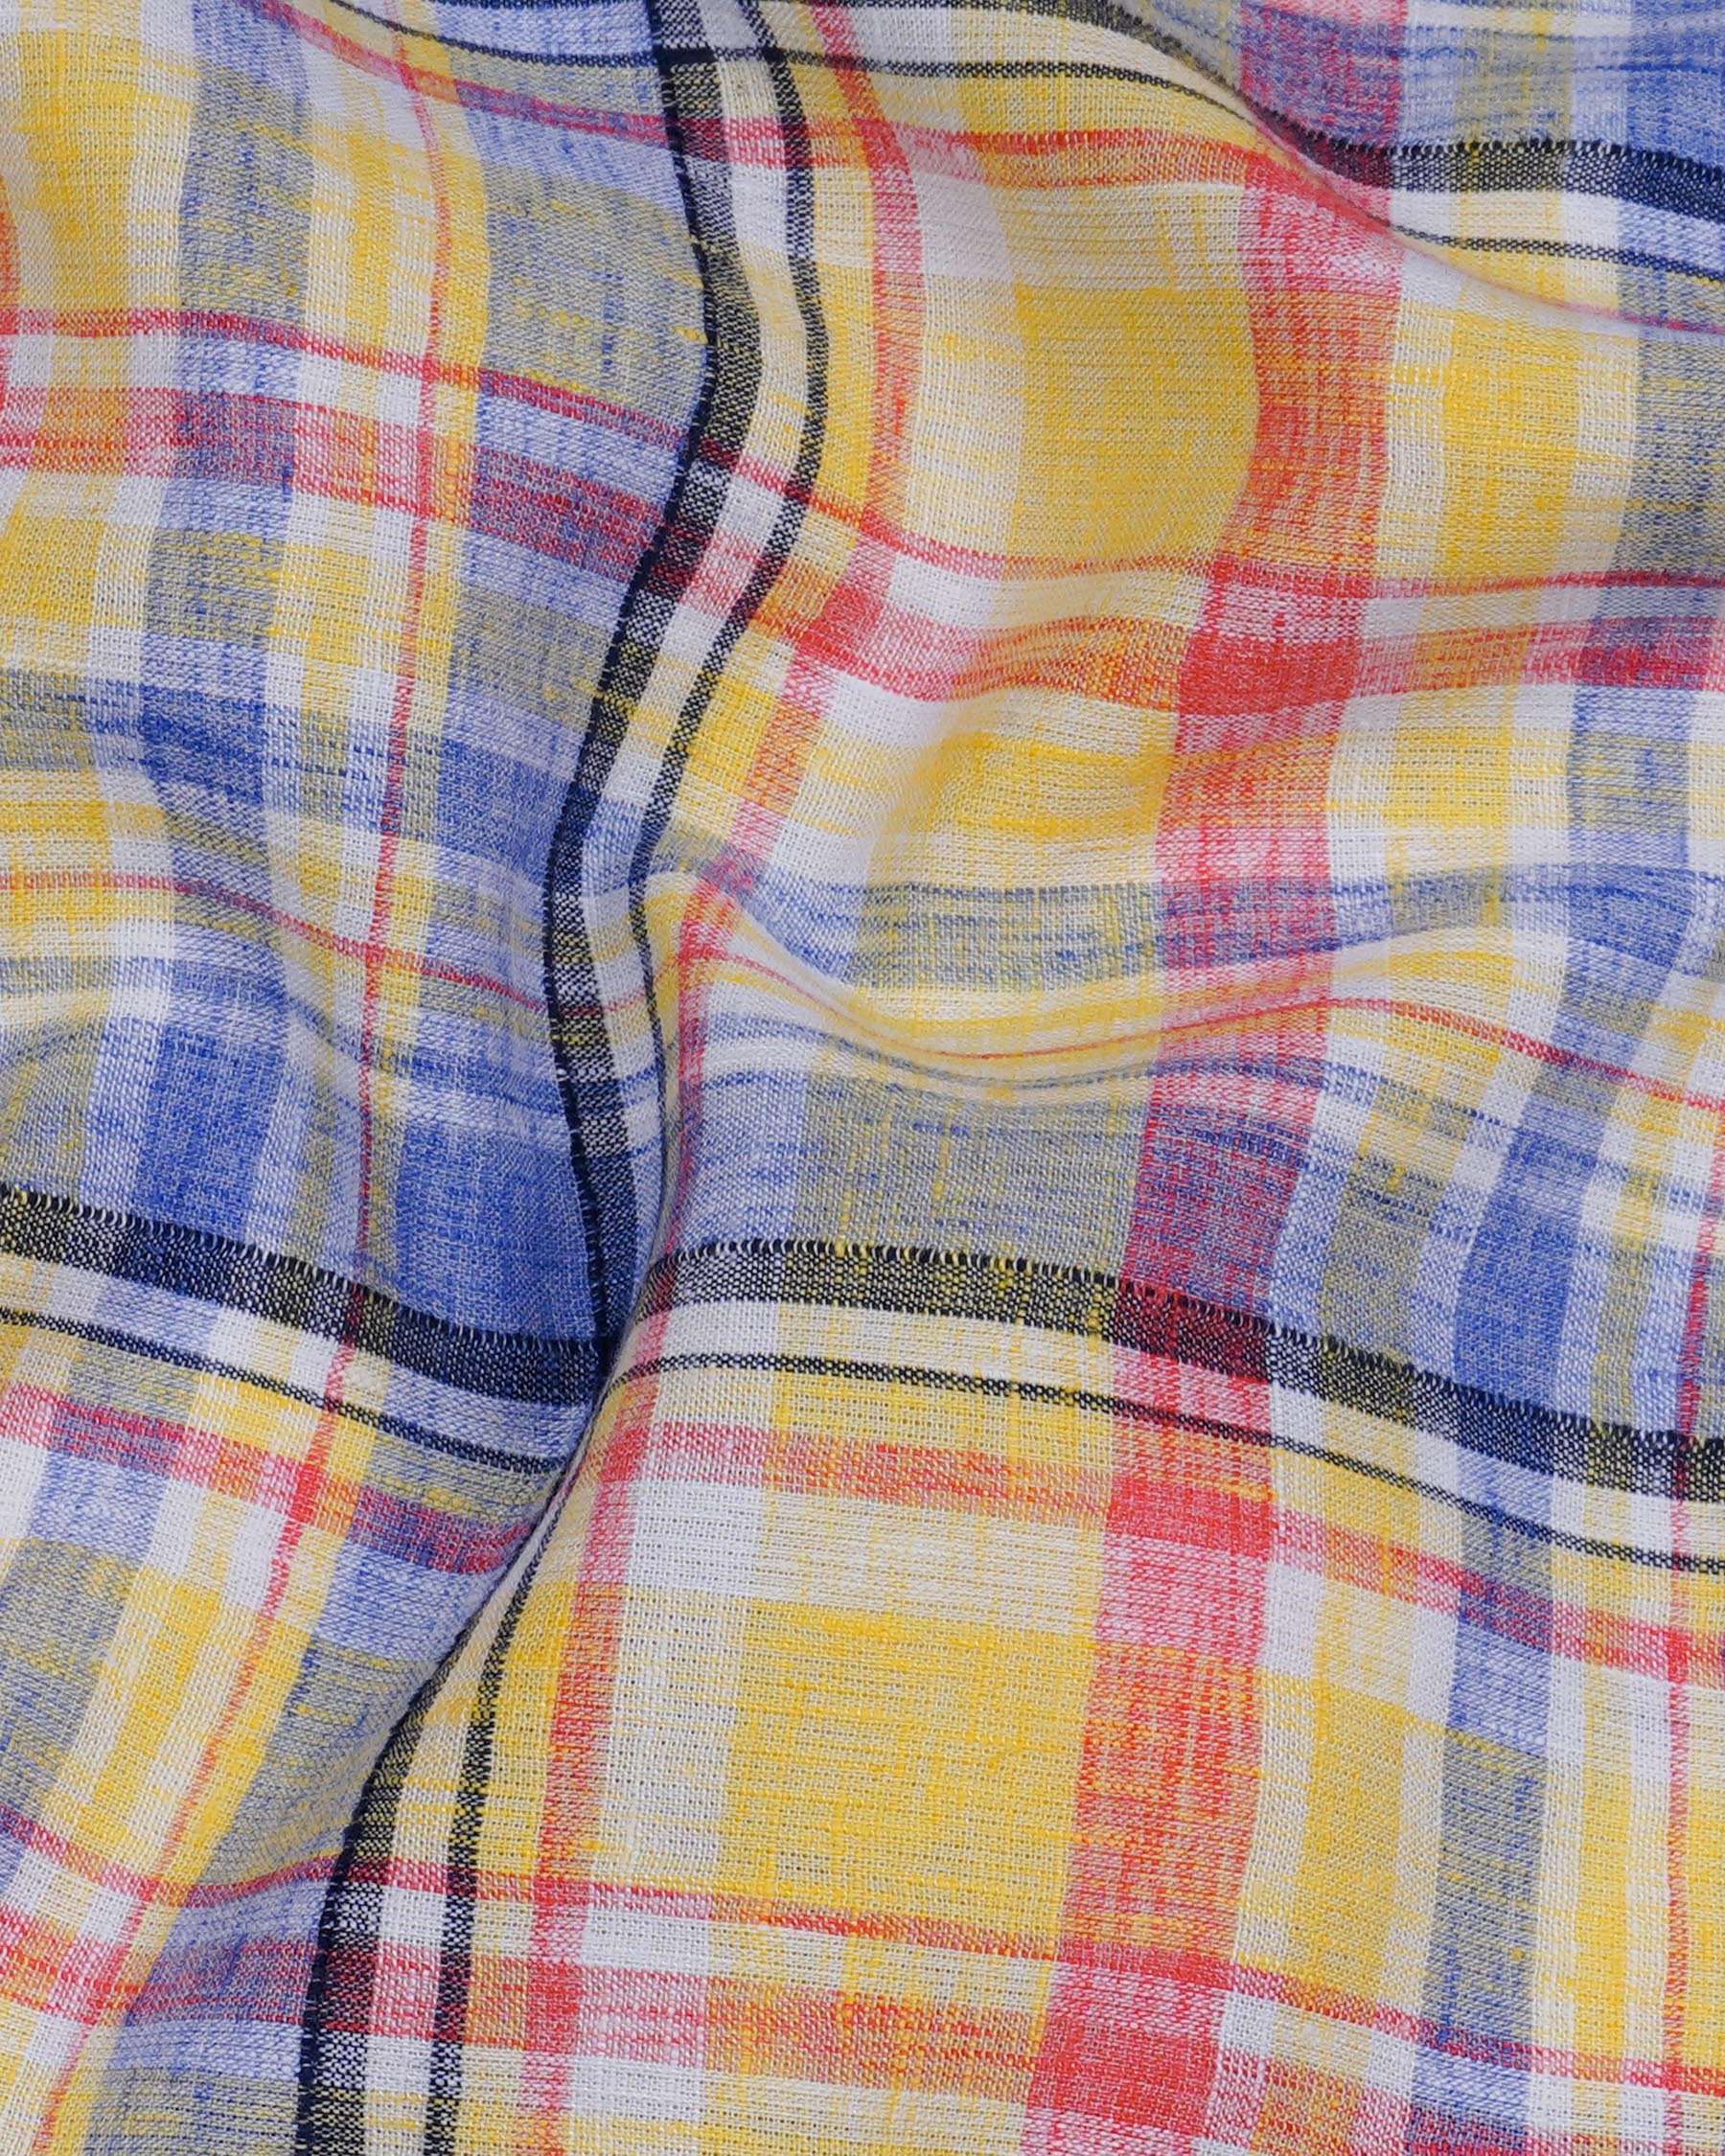 Fall Leaf Yellow and Yonder Blue Plaid Chambray Textured Premium Cotton Shirt 7844-YL-38,7844-YL-38,7844-YL-39,7844-YL-39,7844-YL-40,7844-YL-40,7844-YL-42,7844-YL-42,7844-YL-44,7844-YL-44,7844-YL-46,7844-YL-46,7844-YL-48,7844-YL-48,7844-YL-50,7844-YL-50,7844-YL-52,7844-YL-52